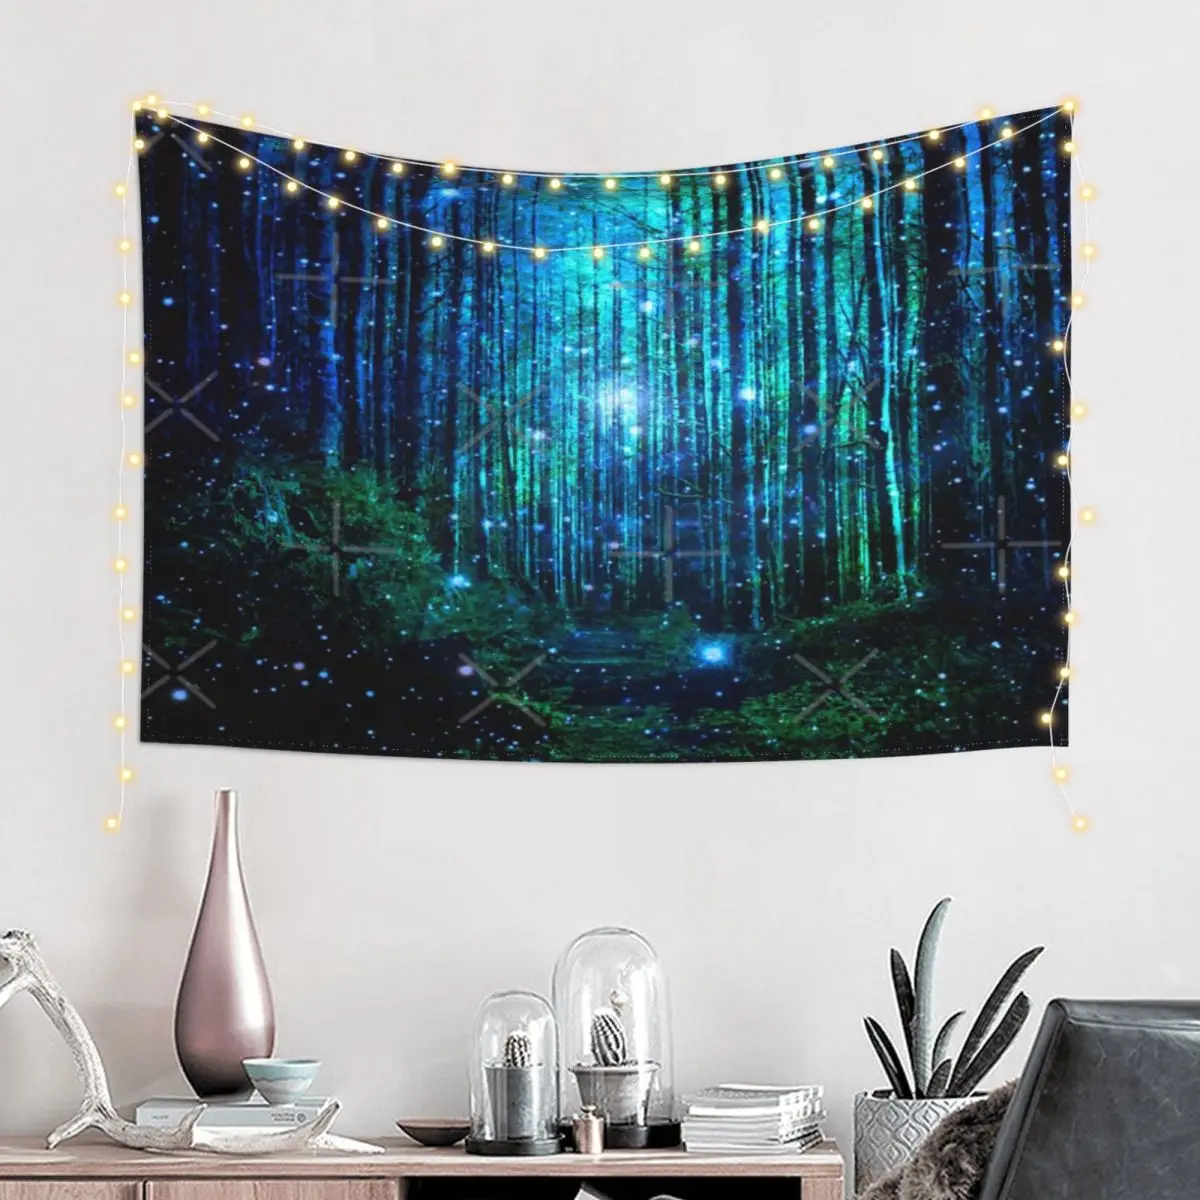 

In The Magical Forest Wall Decor Tapestry Easy To Hang Bedroom Birthday Gift Polyester Bedspread Odorless Customizable